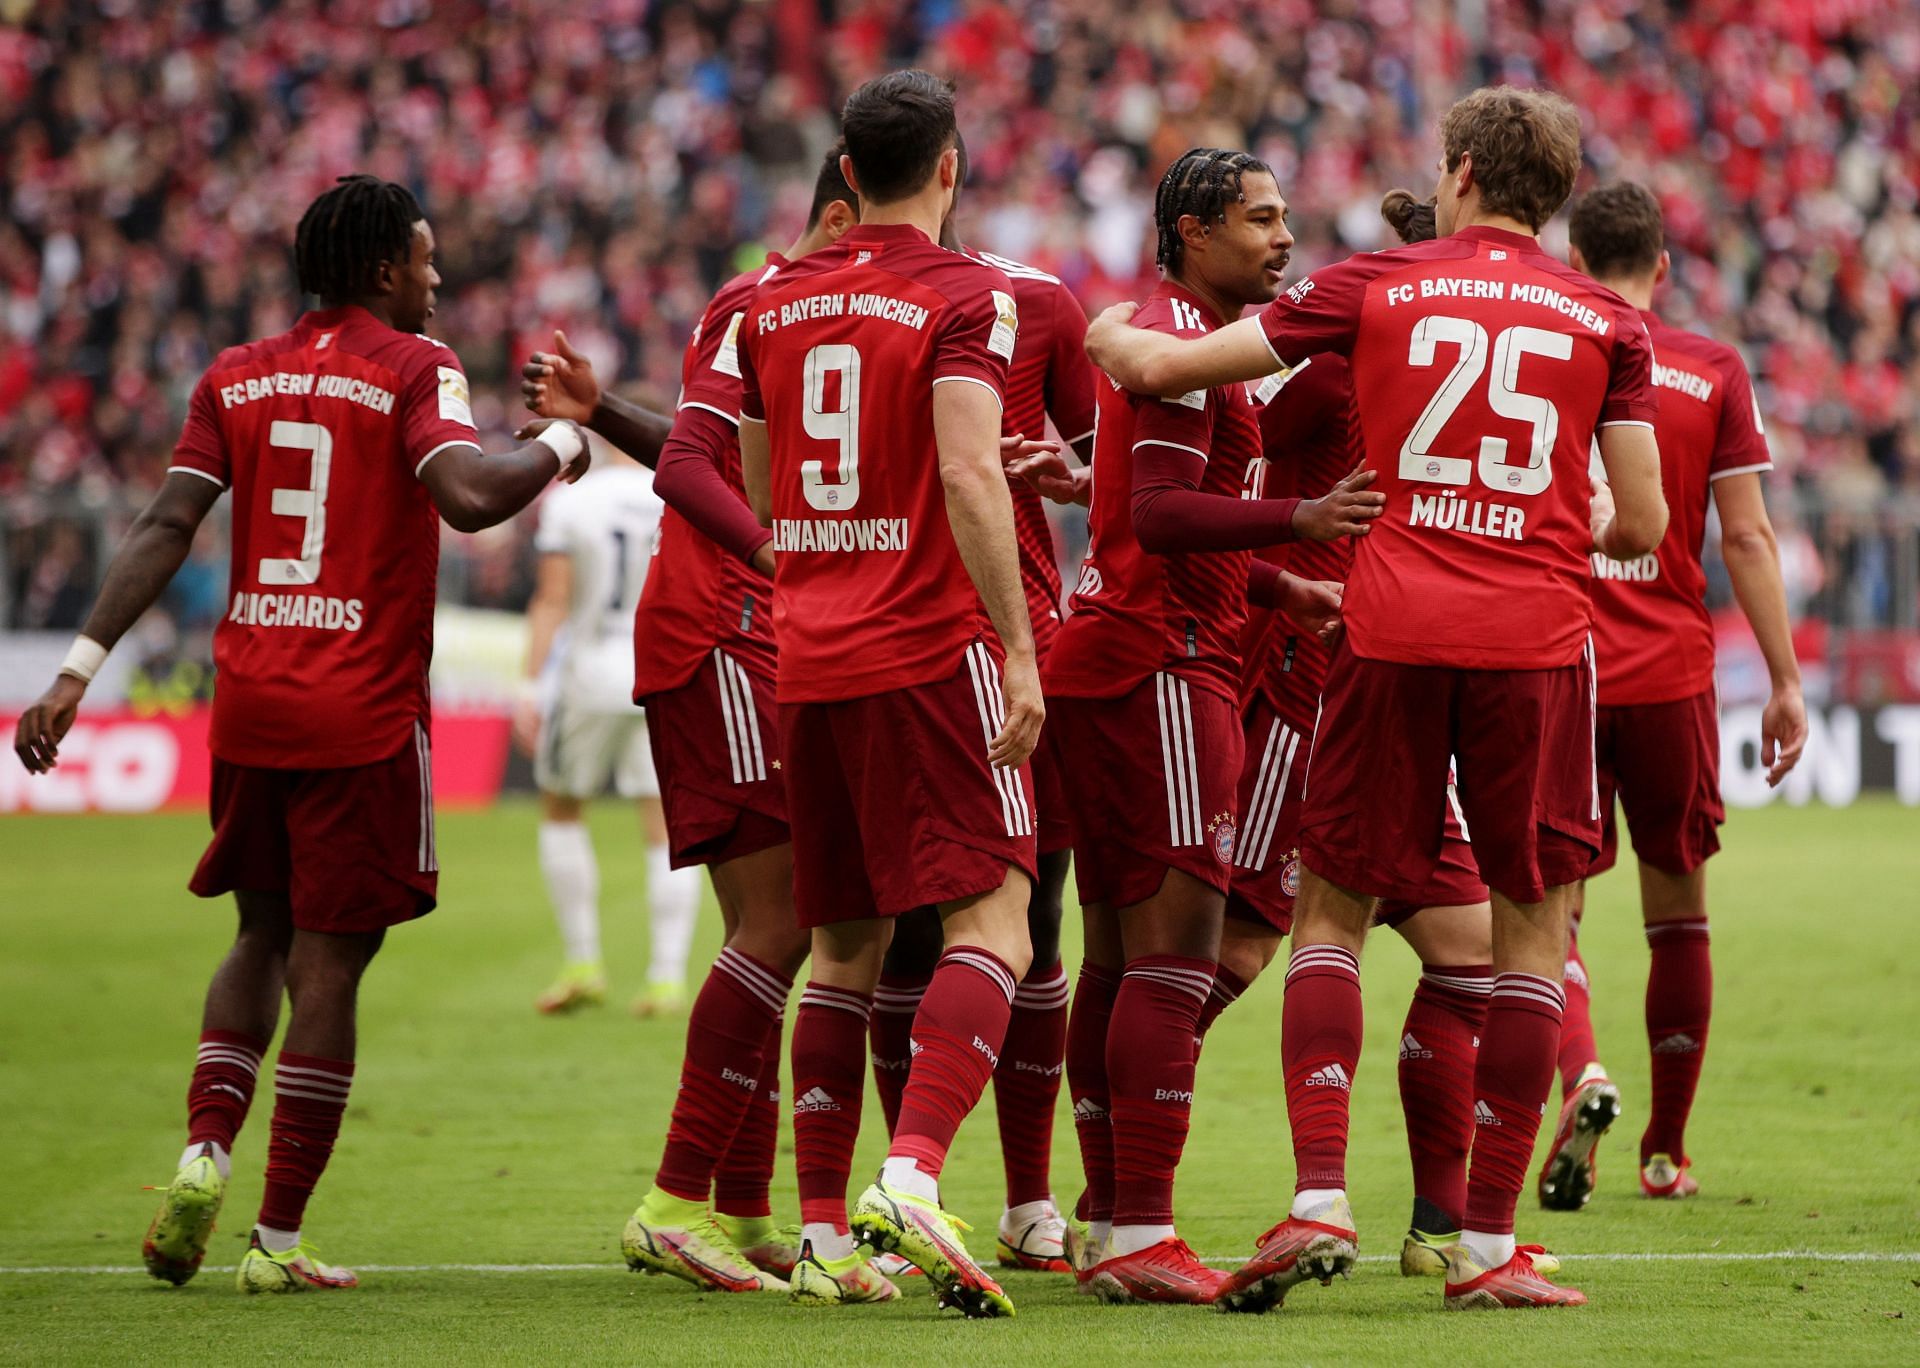 Bayern Munich have an enviable roster.